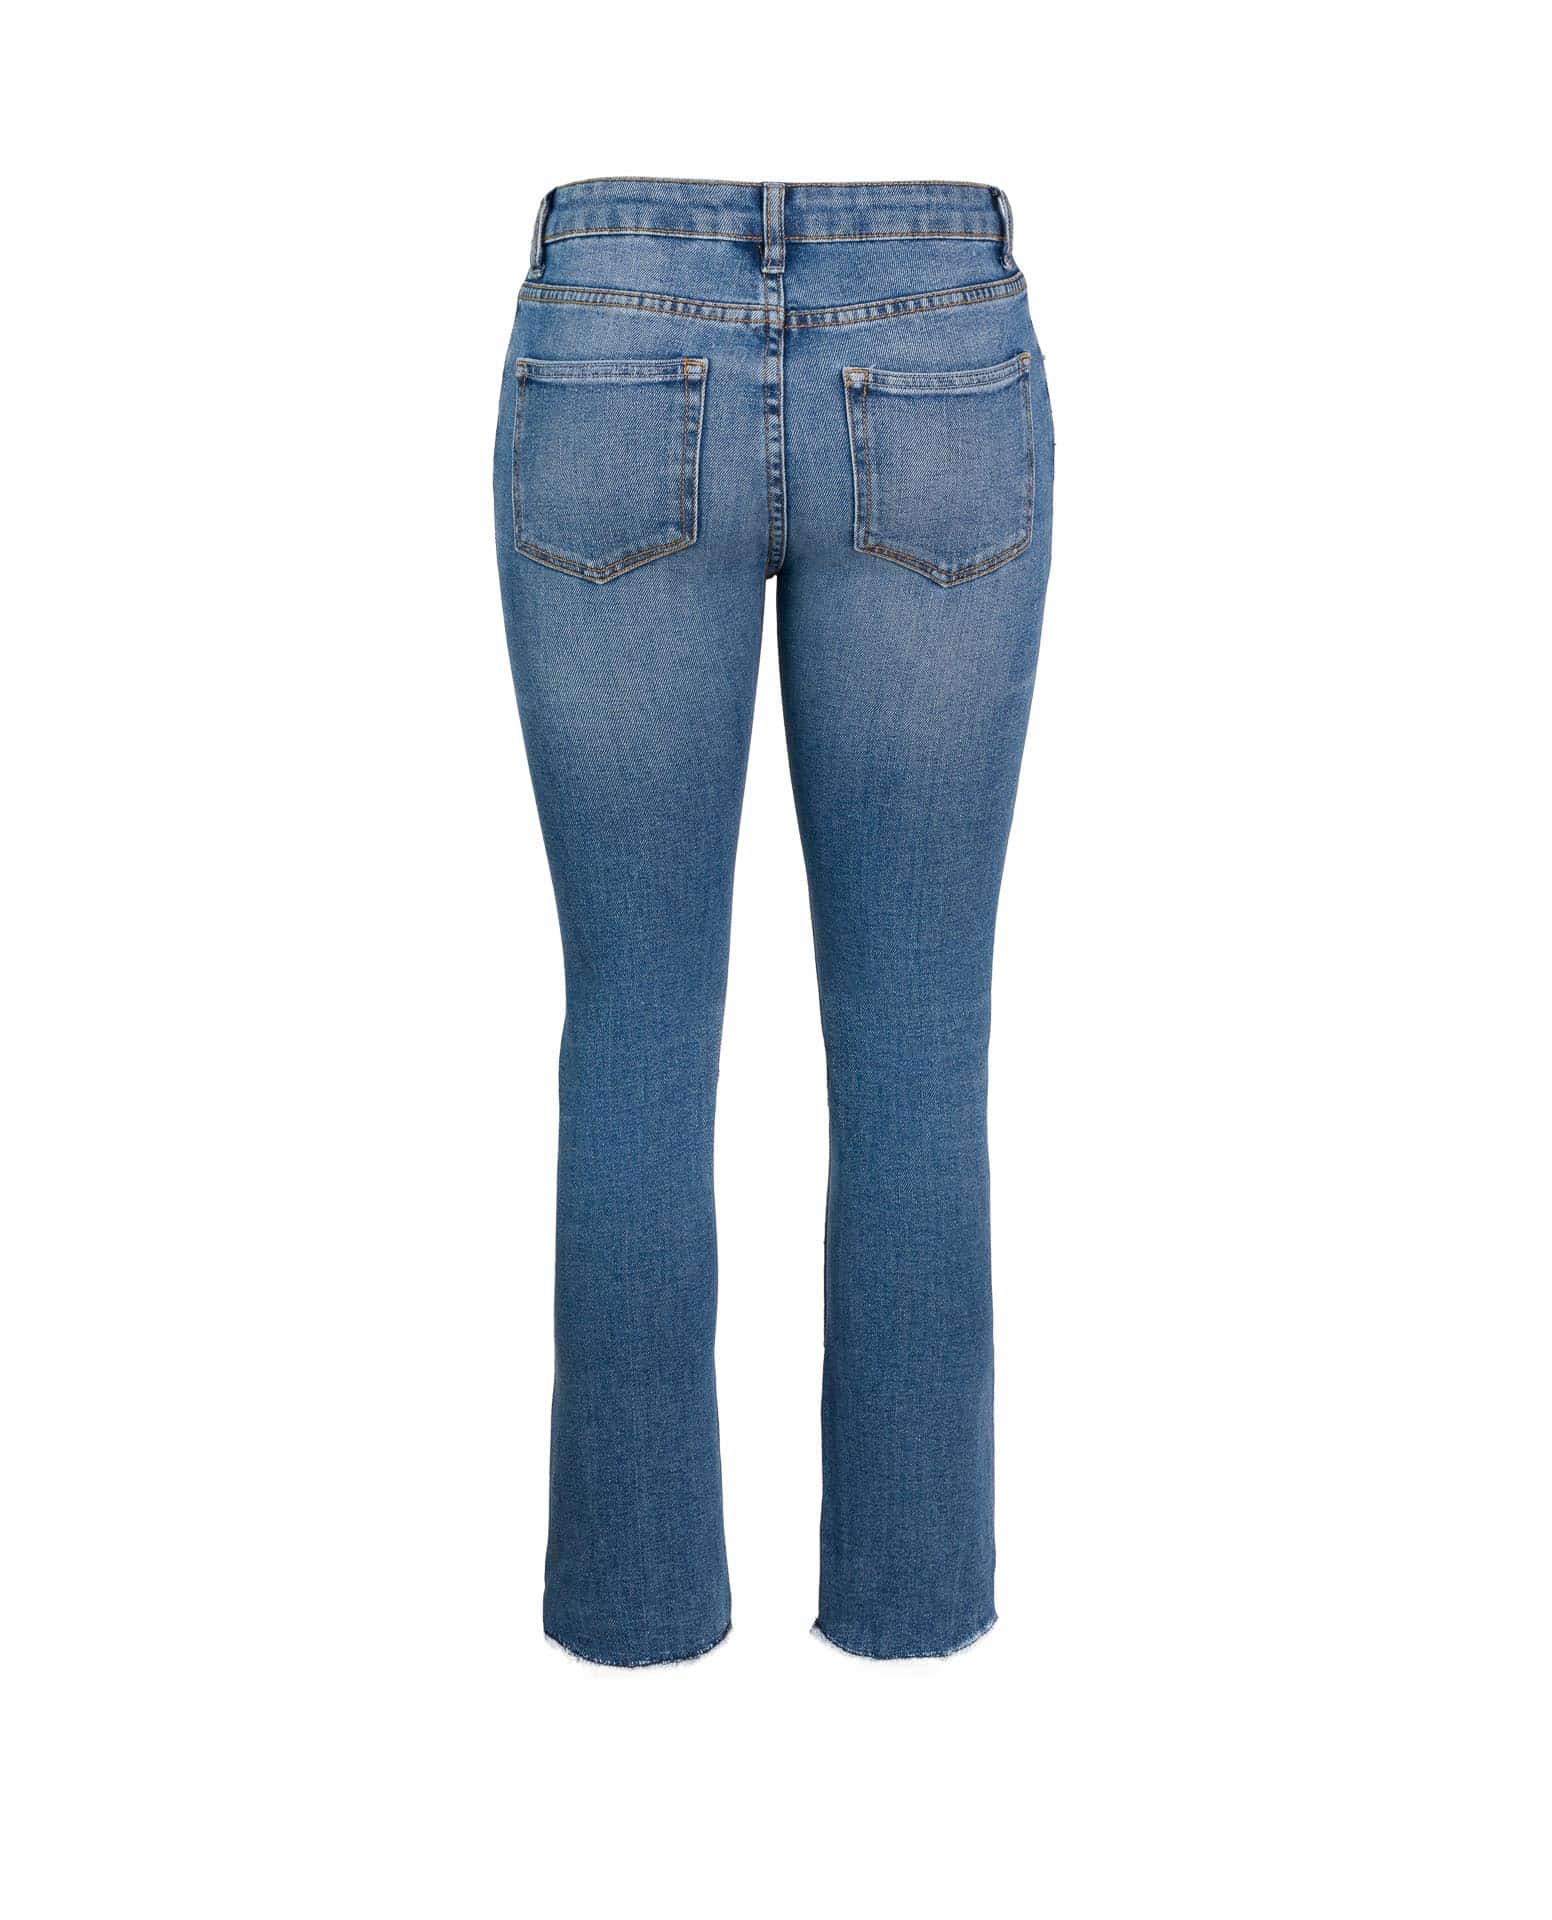 CARO CAPRI ANKLE JEANS - buy online at Marina Anouilh Gstaad